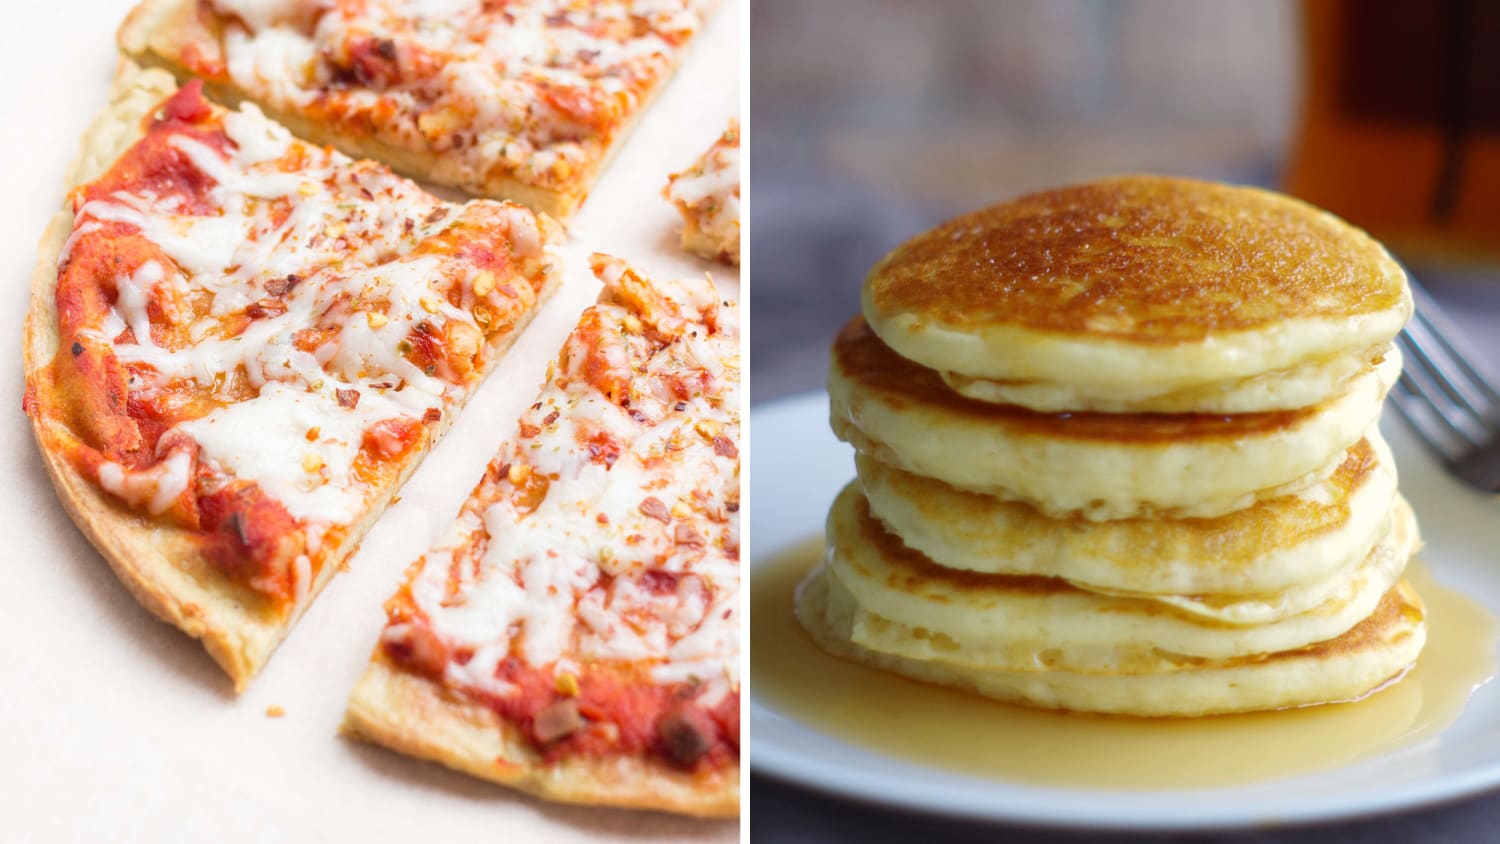 Gluten-free comfort food: Pizza, pancakes, cupcakes and more